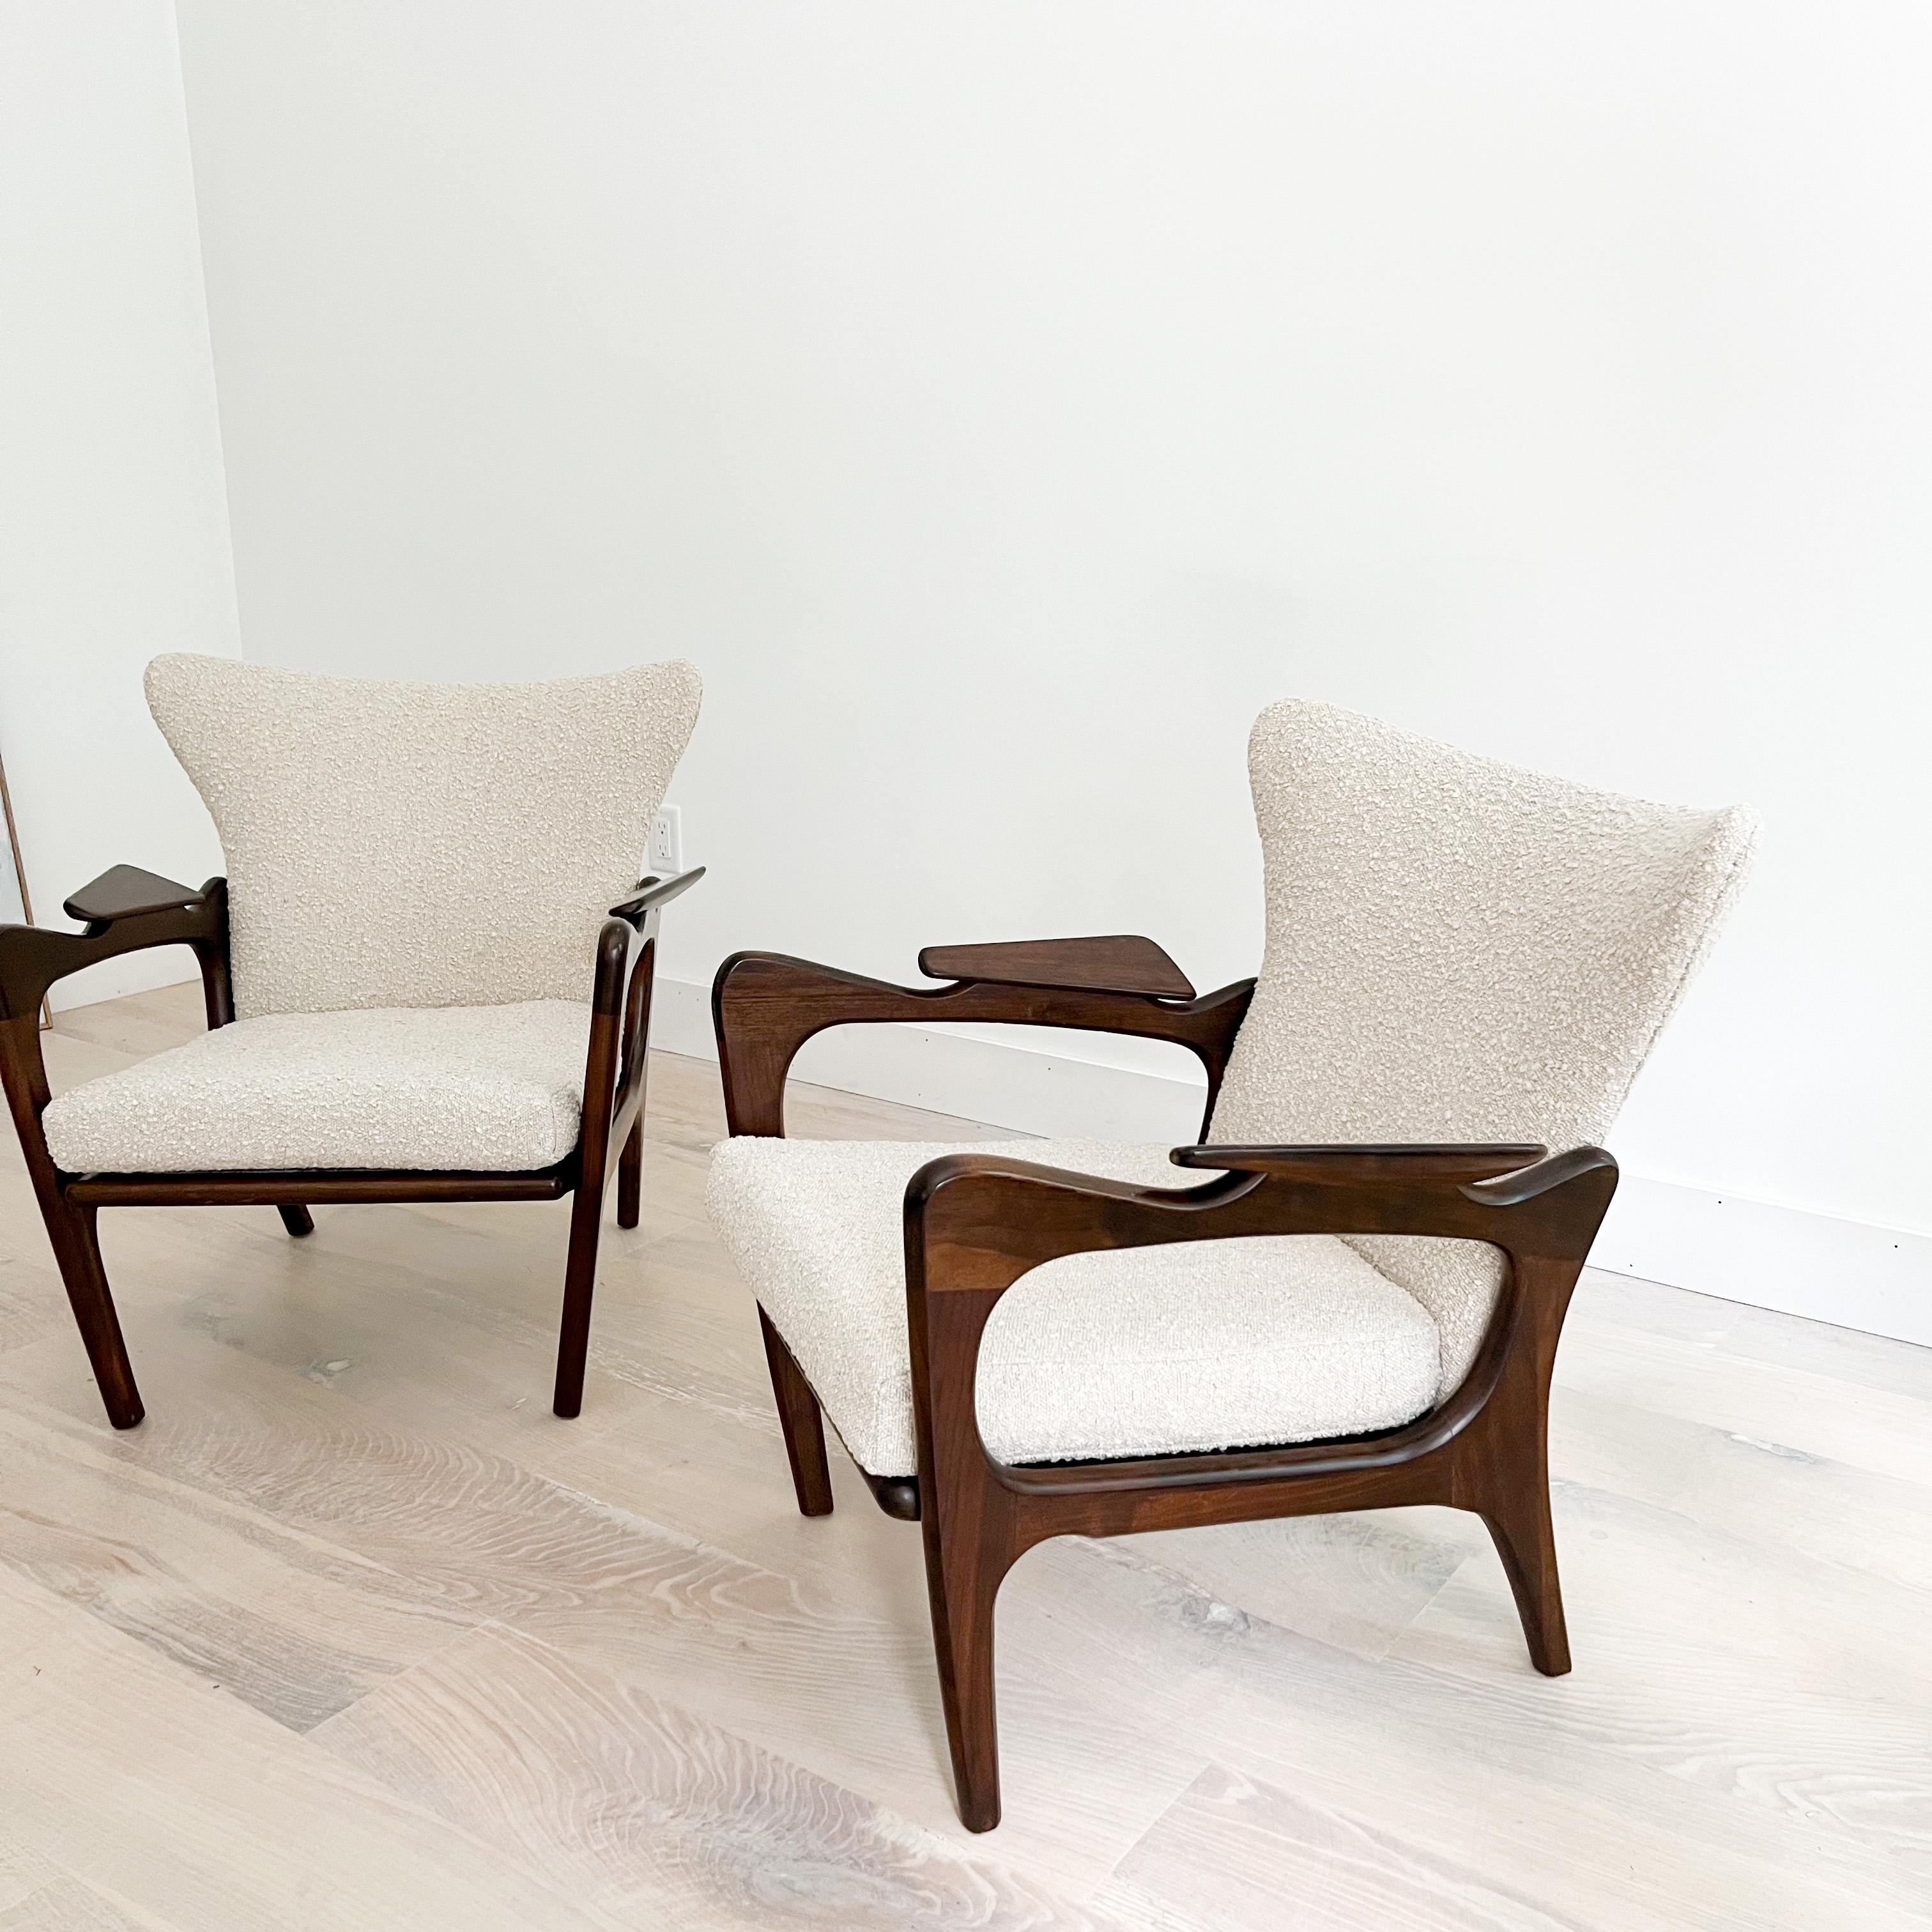 Mid-20th Century Pair of Mid-Century Modern Adrian Pearsall Lounge Chairs, New Boucle Upholstery